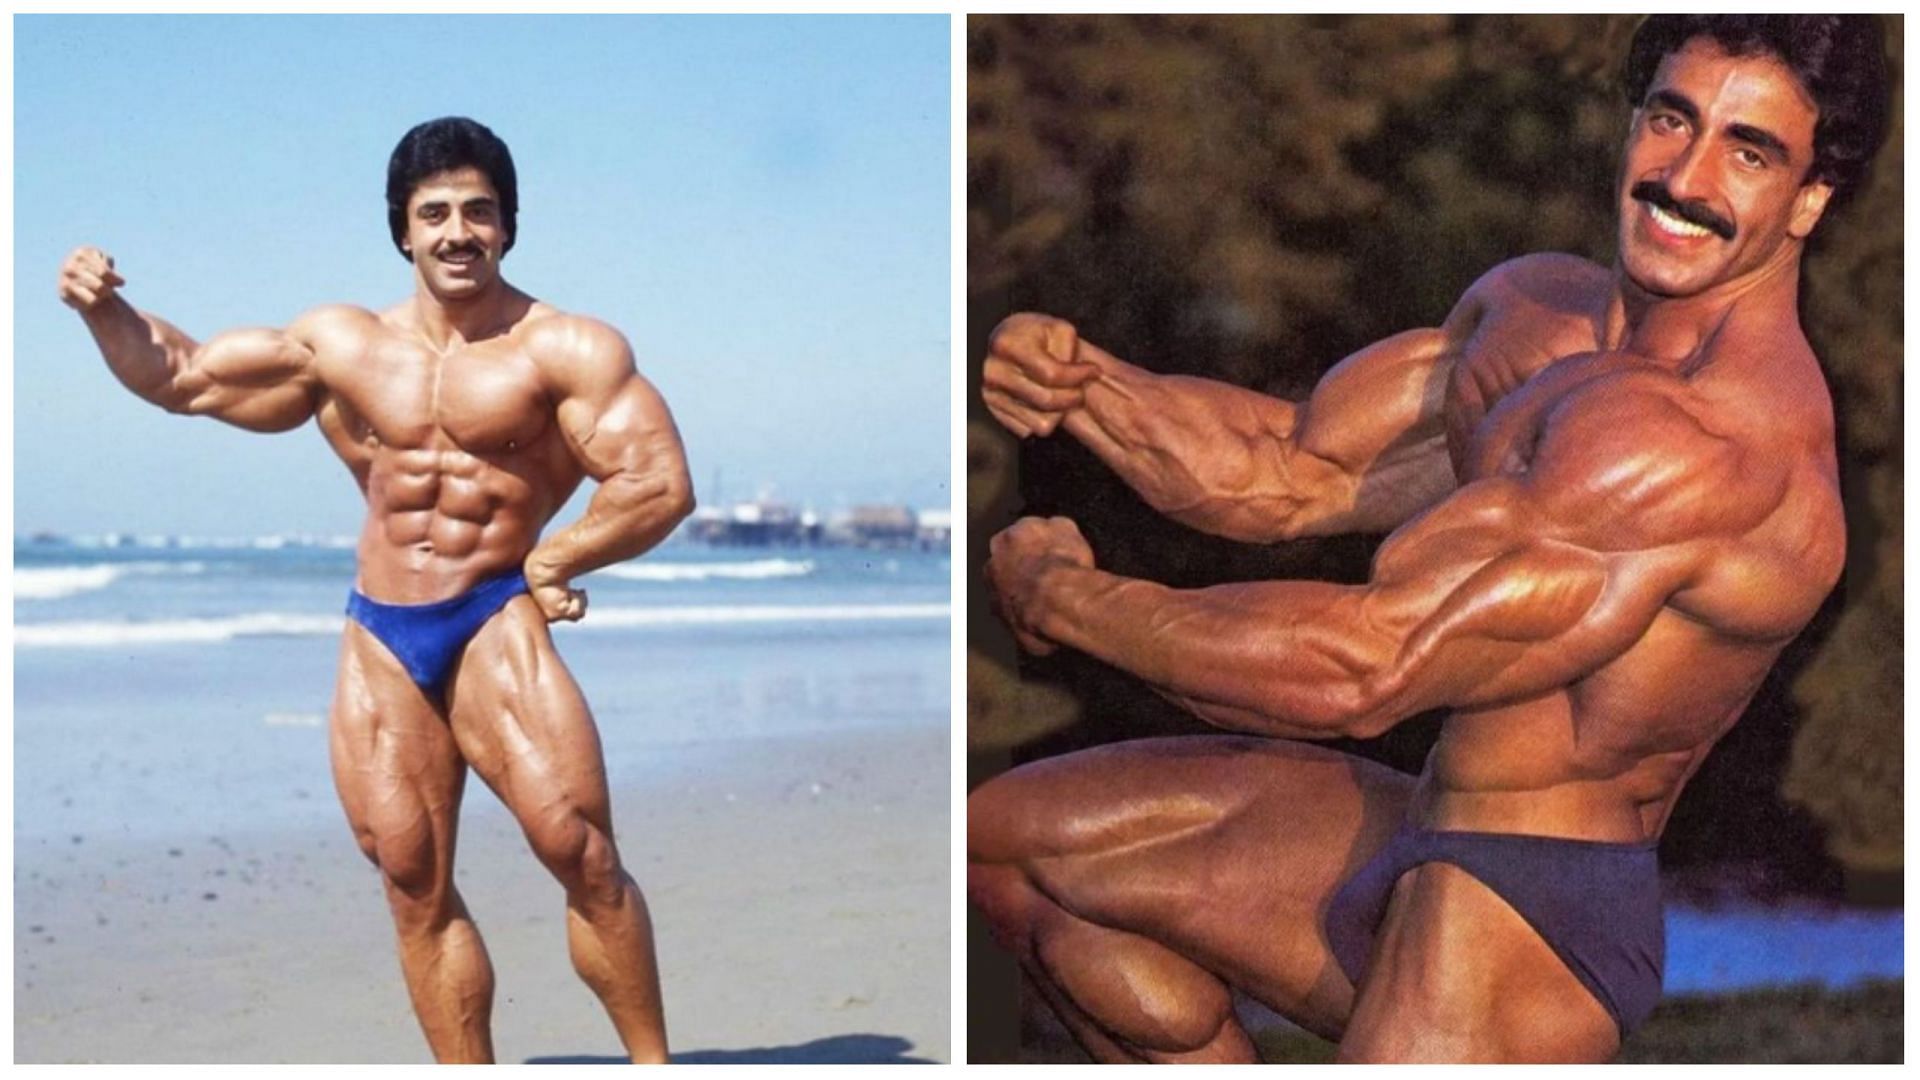 Samir Bannout ate a well balanced meal and had a split-workout routine. (Image via IG @sickkuntsigmav2/ @bodybuilding_goat)